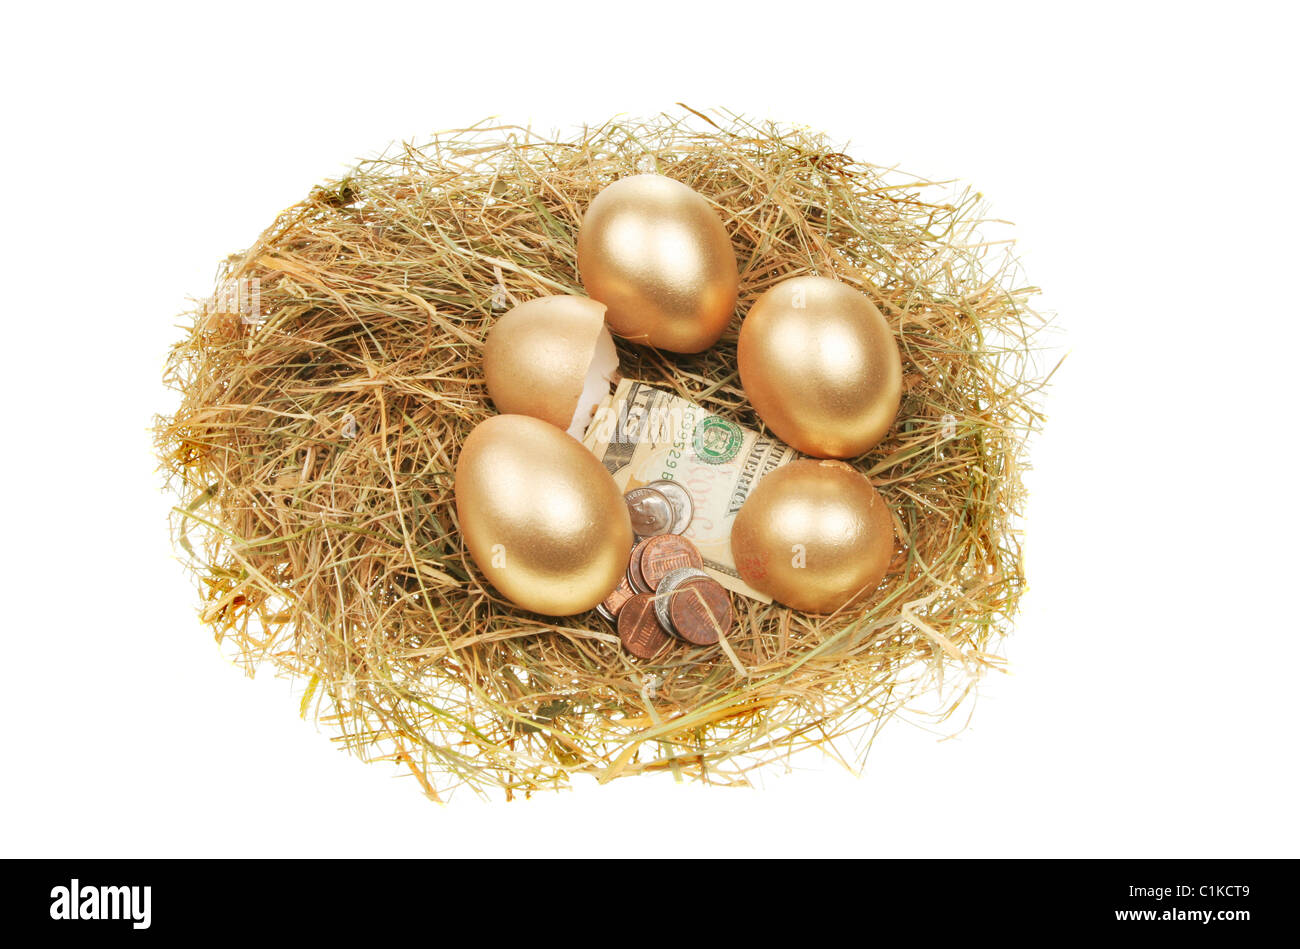 Whole and broken gold eggs with money in a nest of hay Stock Photo